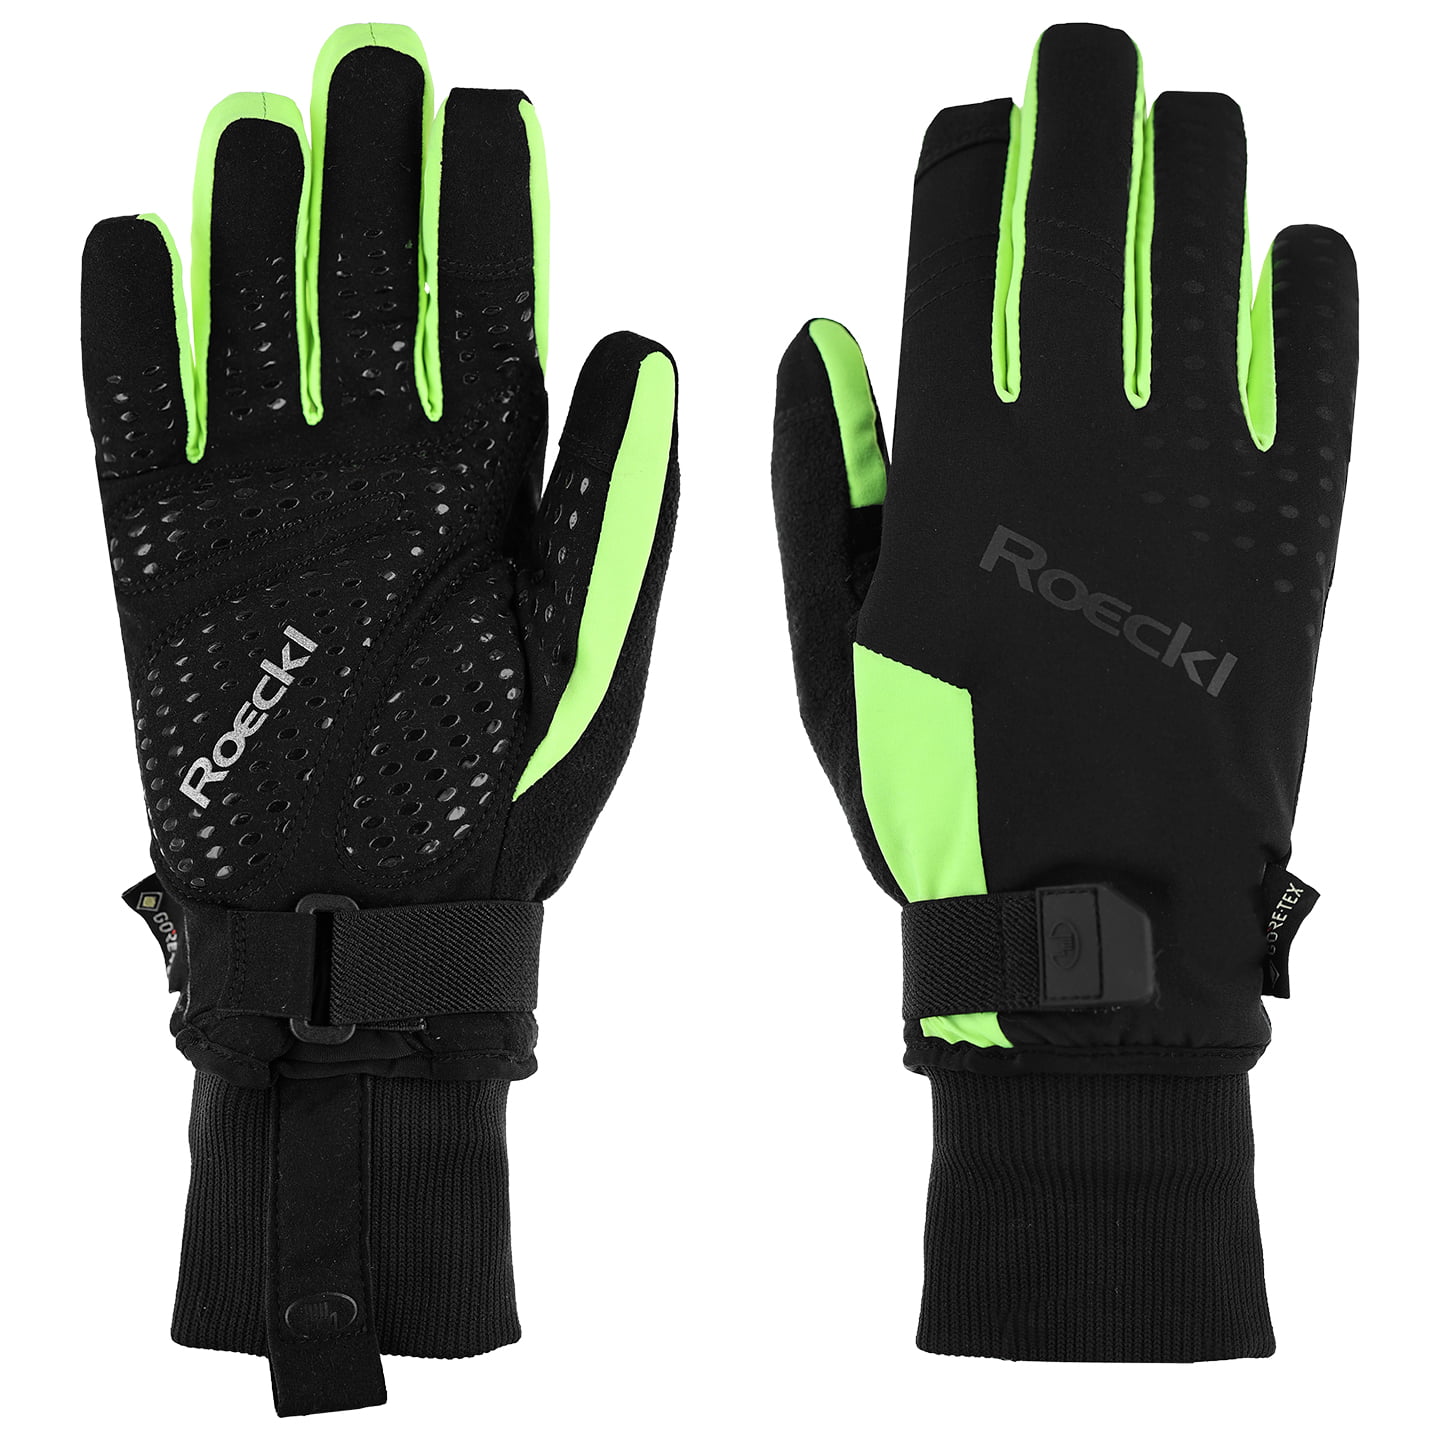 ROECKL Winter Gloves Rocca 2 GTX Winter Cycling Gloves, for men, size 9,5, Bike gloves, Cycling wear